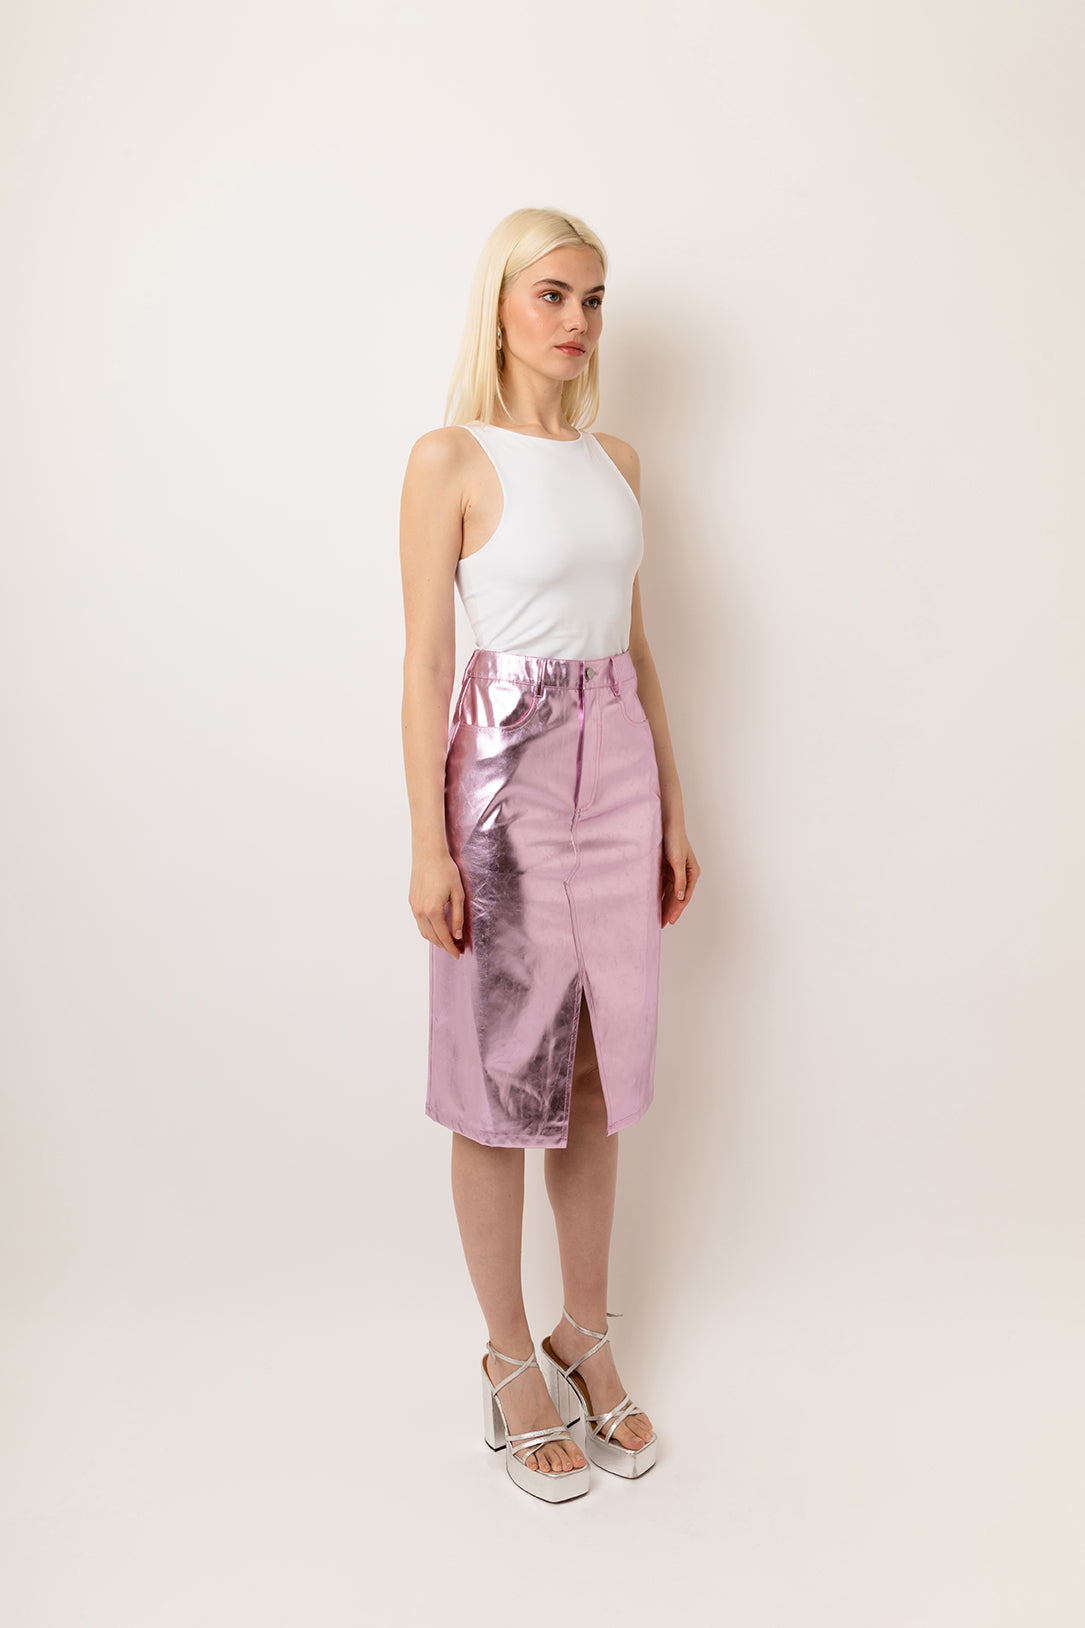 Lupe Shiny Ice Pink High Waisted Metallic Faux Leather Pencil Midi Skirt